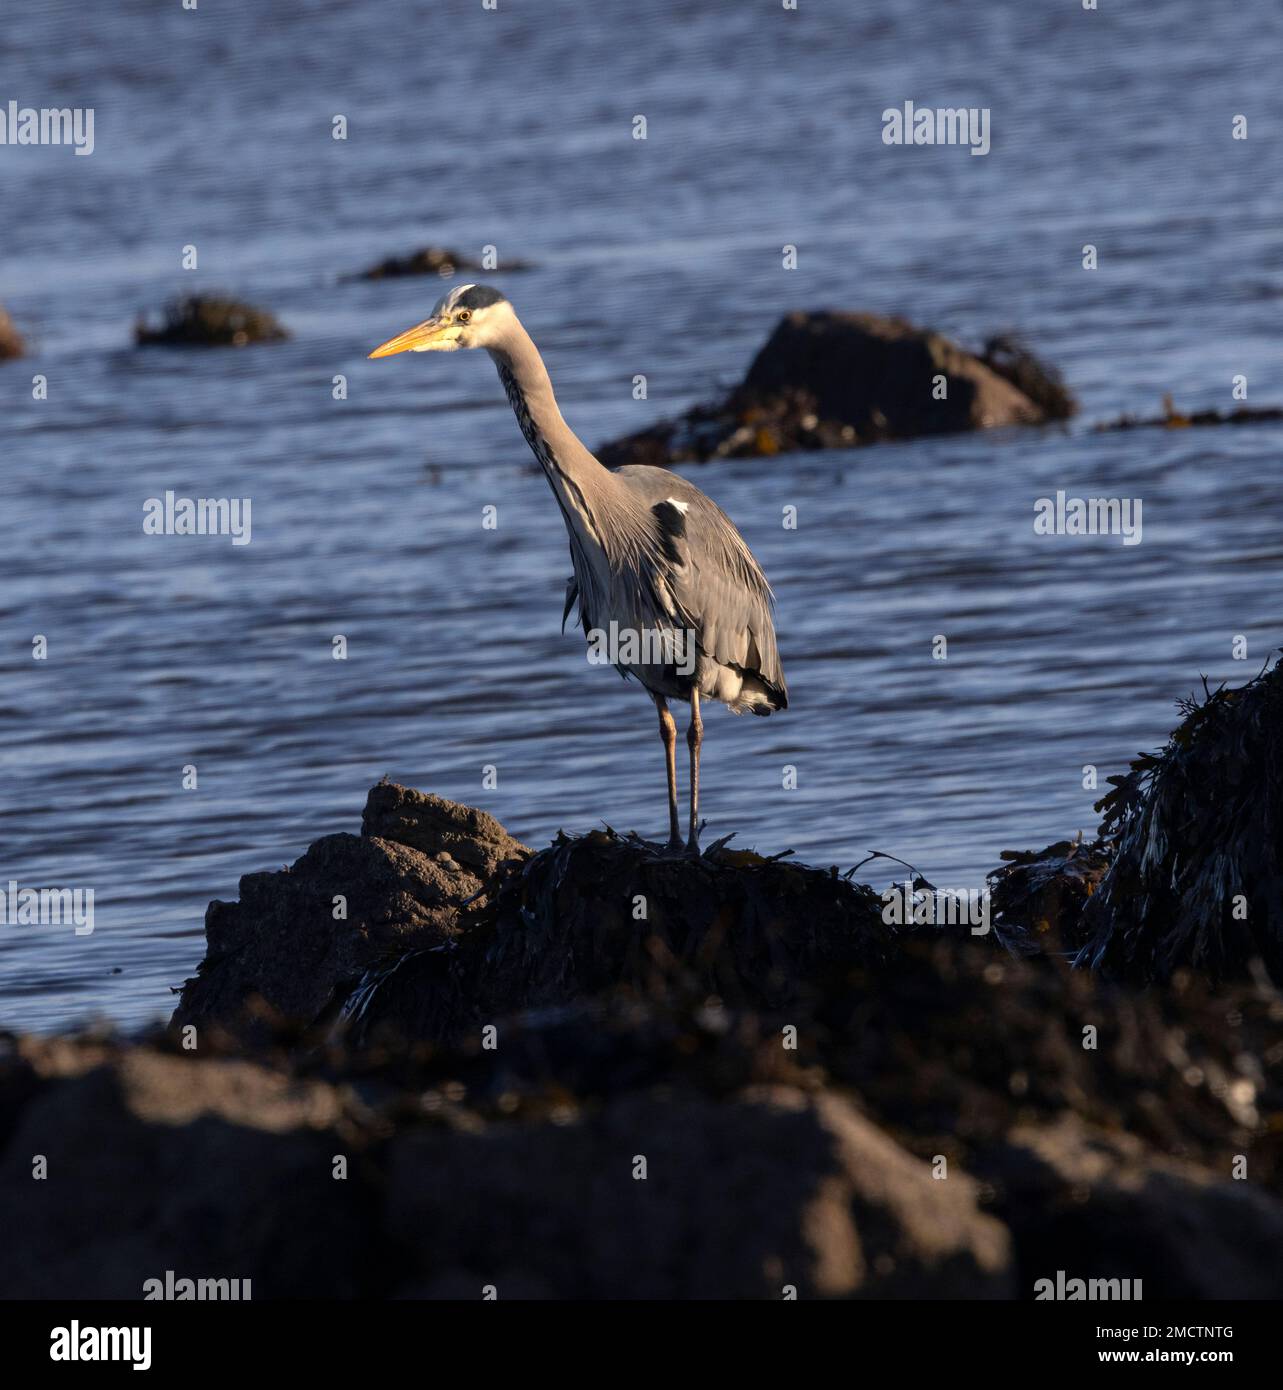 The Grey Heron is equally at home along the coast as with inland freshwater bodies. This one stalks the rock pools at low tide searching for fish. Stock Photo